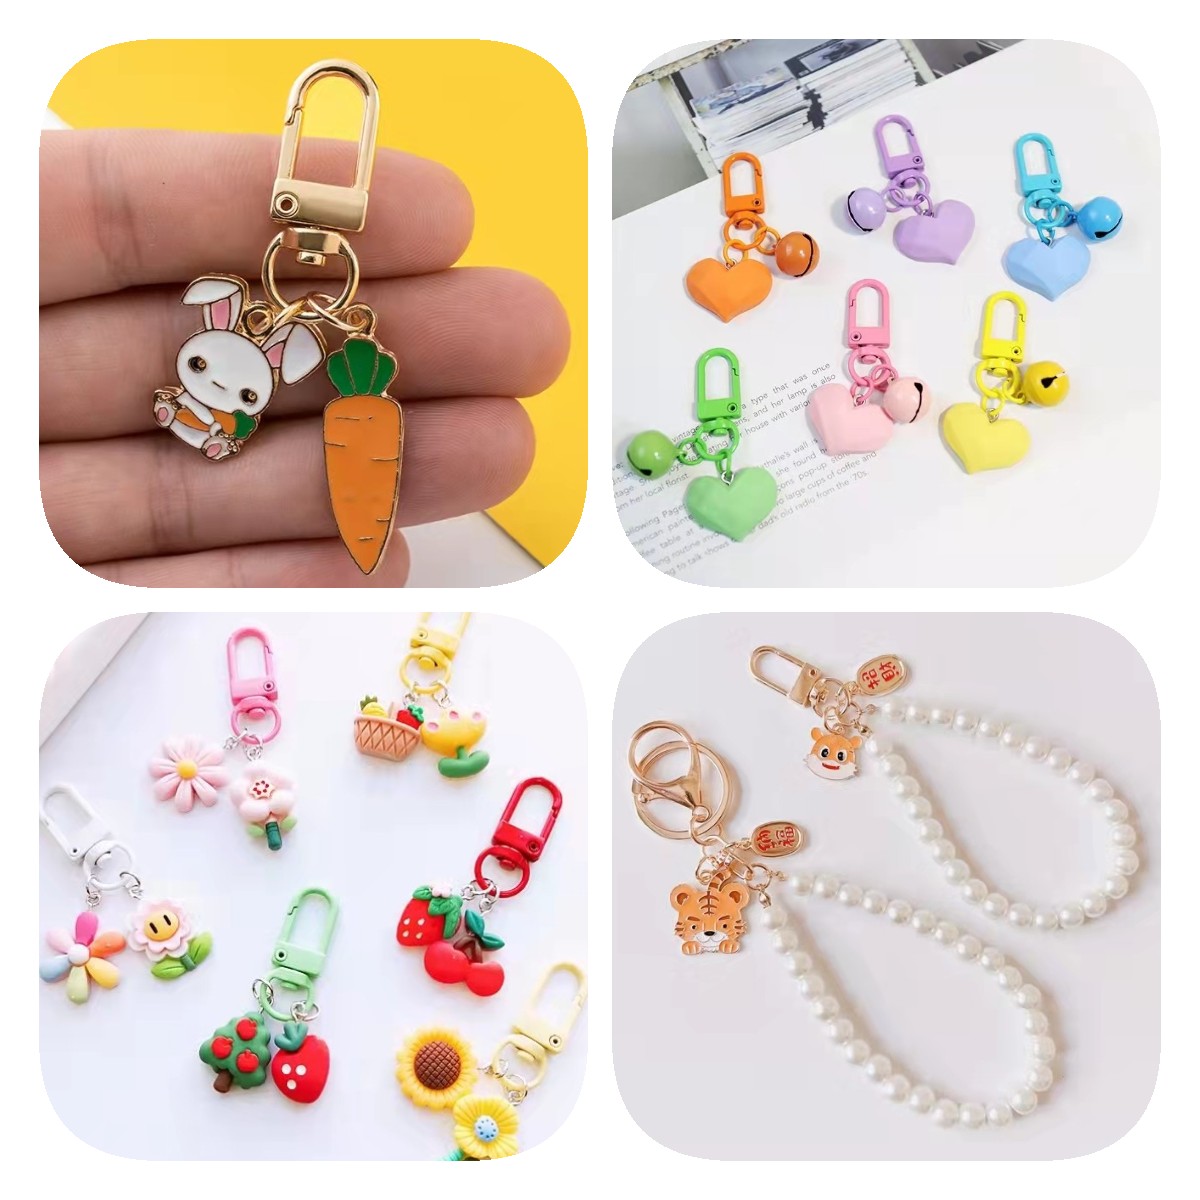 Key Ring Clips and Ring Kit, Cosplay Tools and Equipment